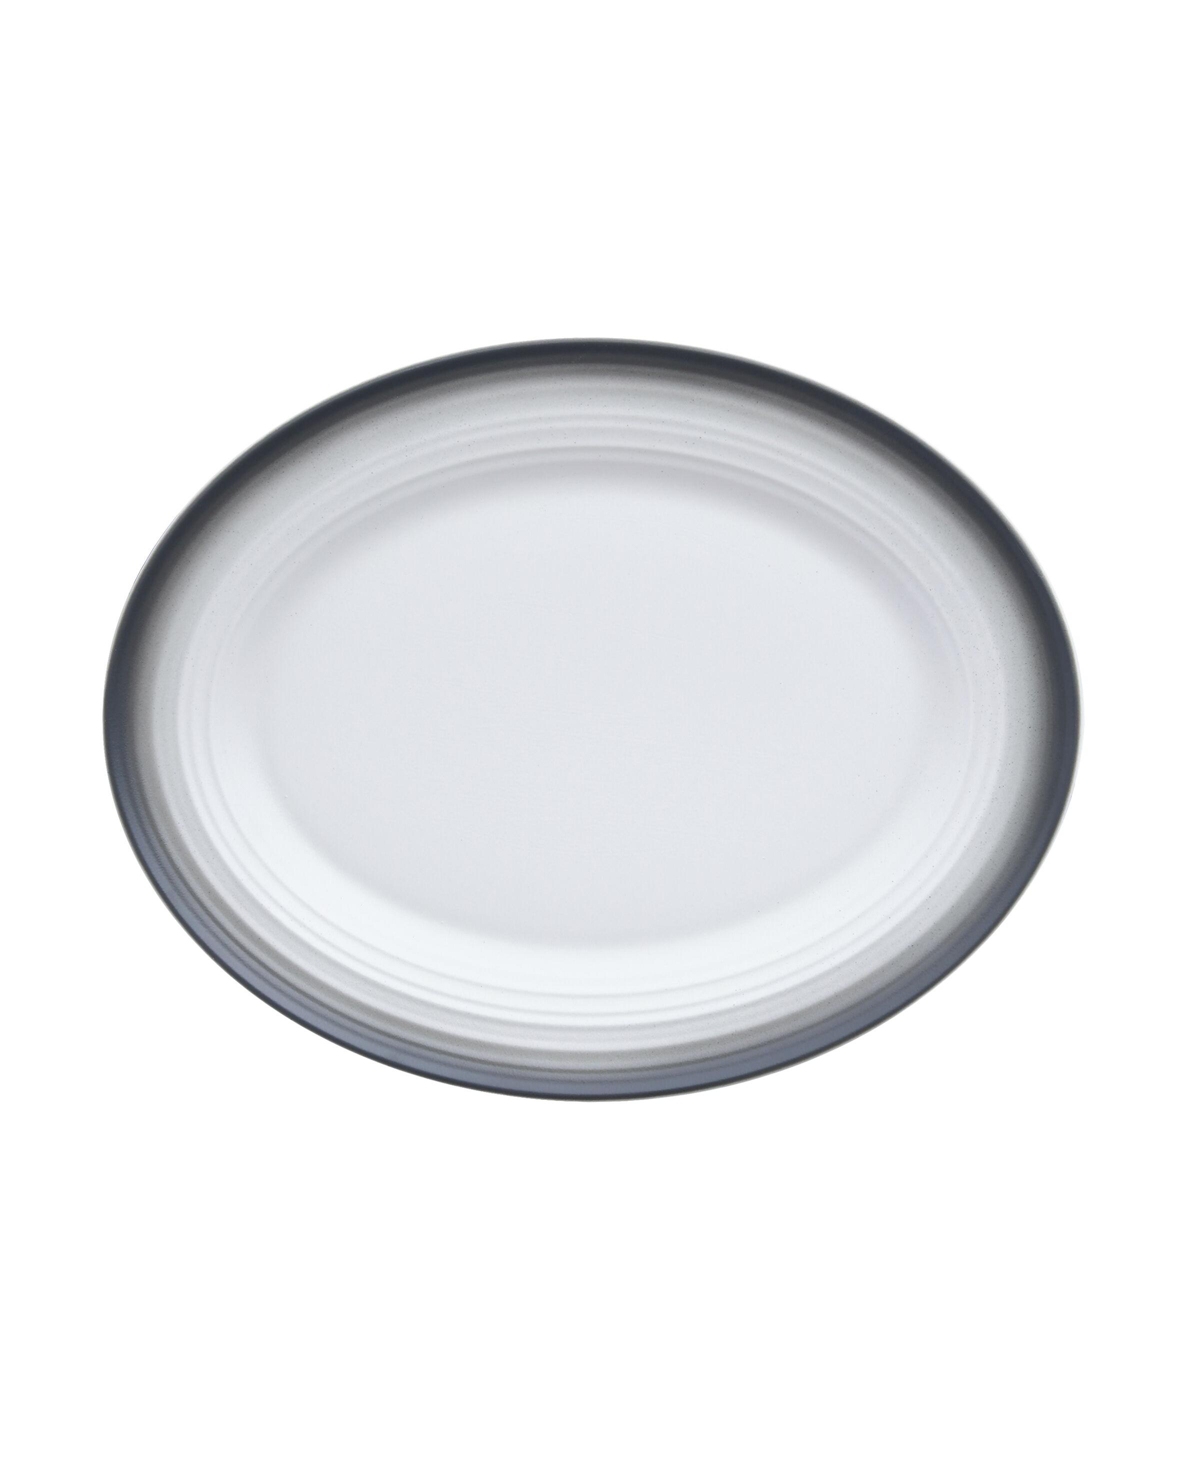 Mikasa Swirl 13.75" Oval Platter, Service For 1 In Gray